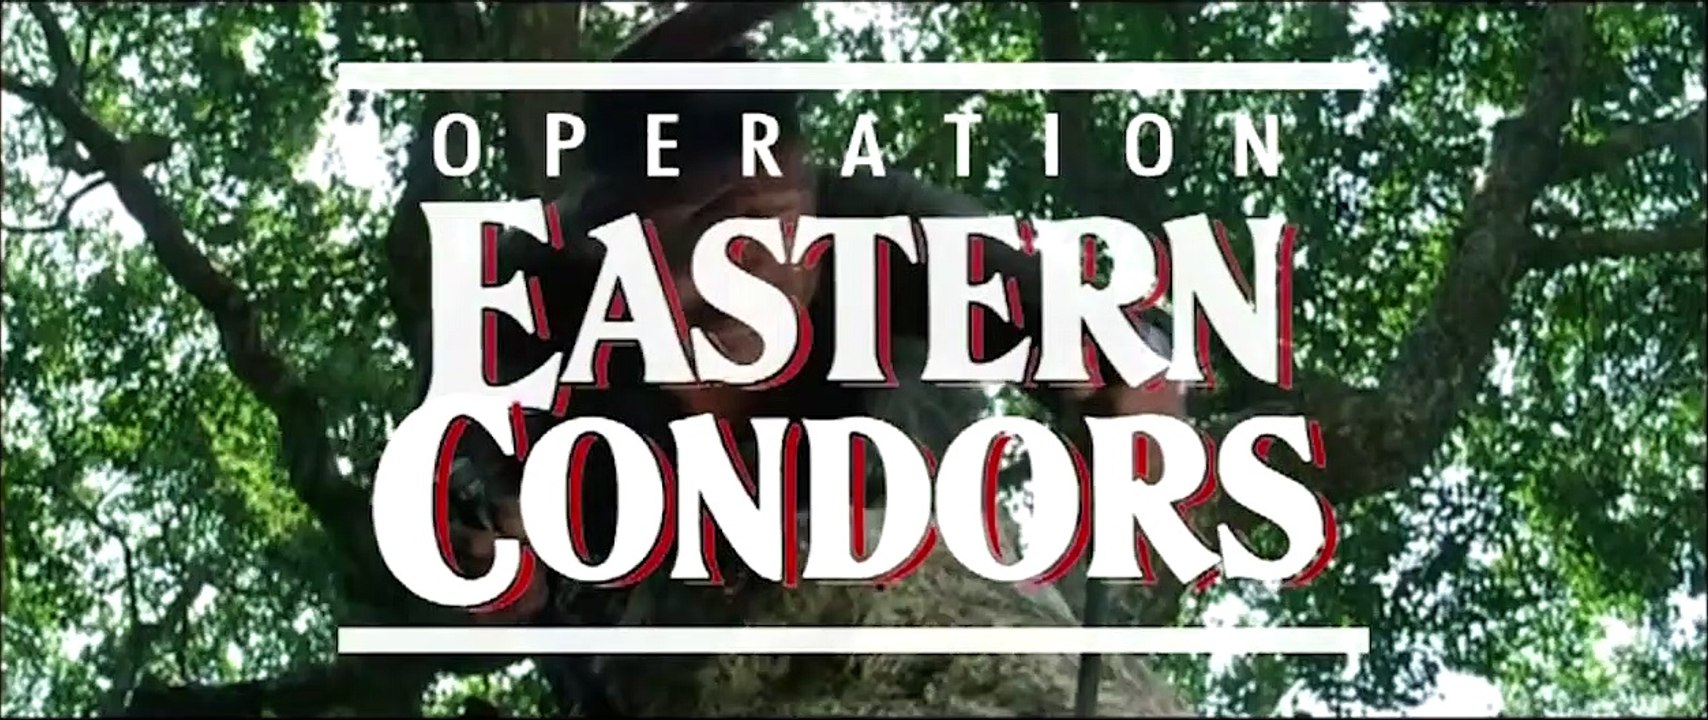 Operation Eastern Condors | movie | 1987 | Official Trailer